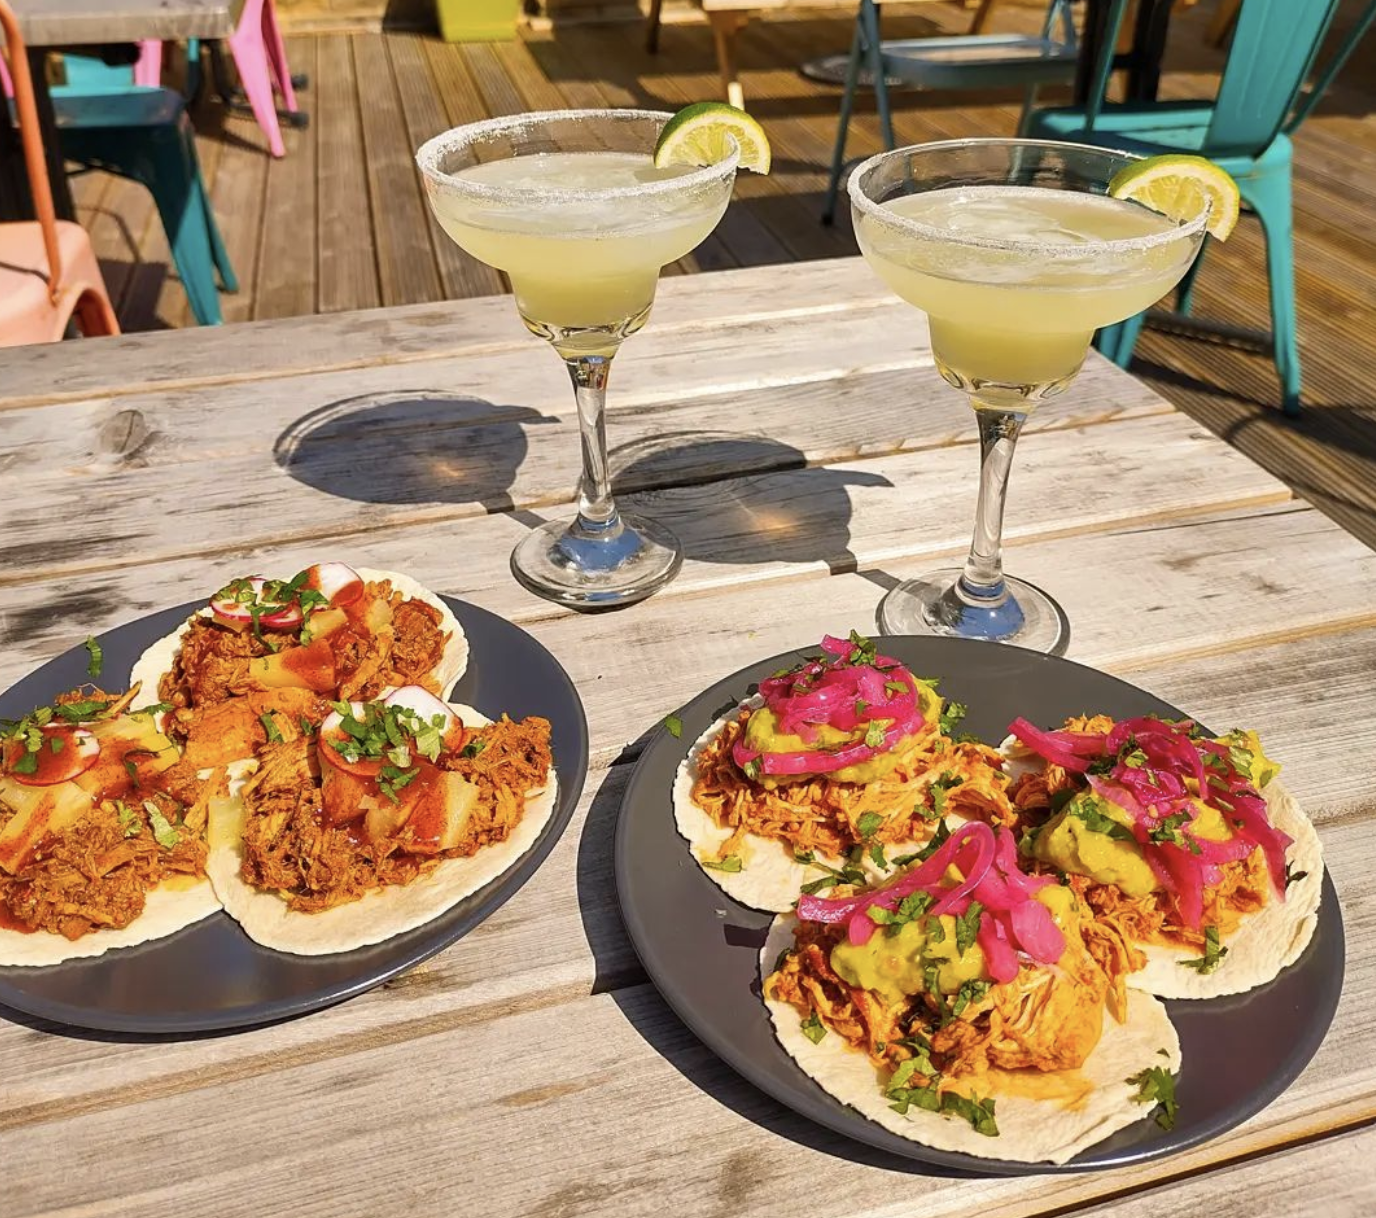 margaritas and open tacos.